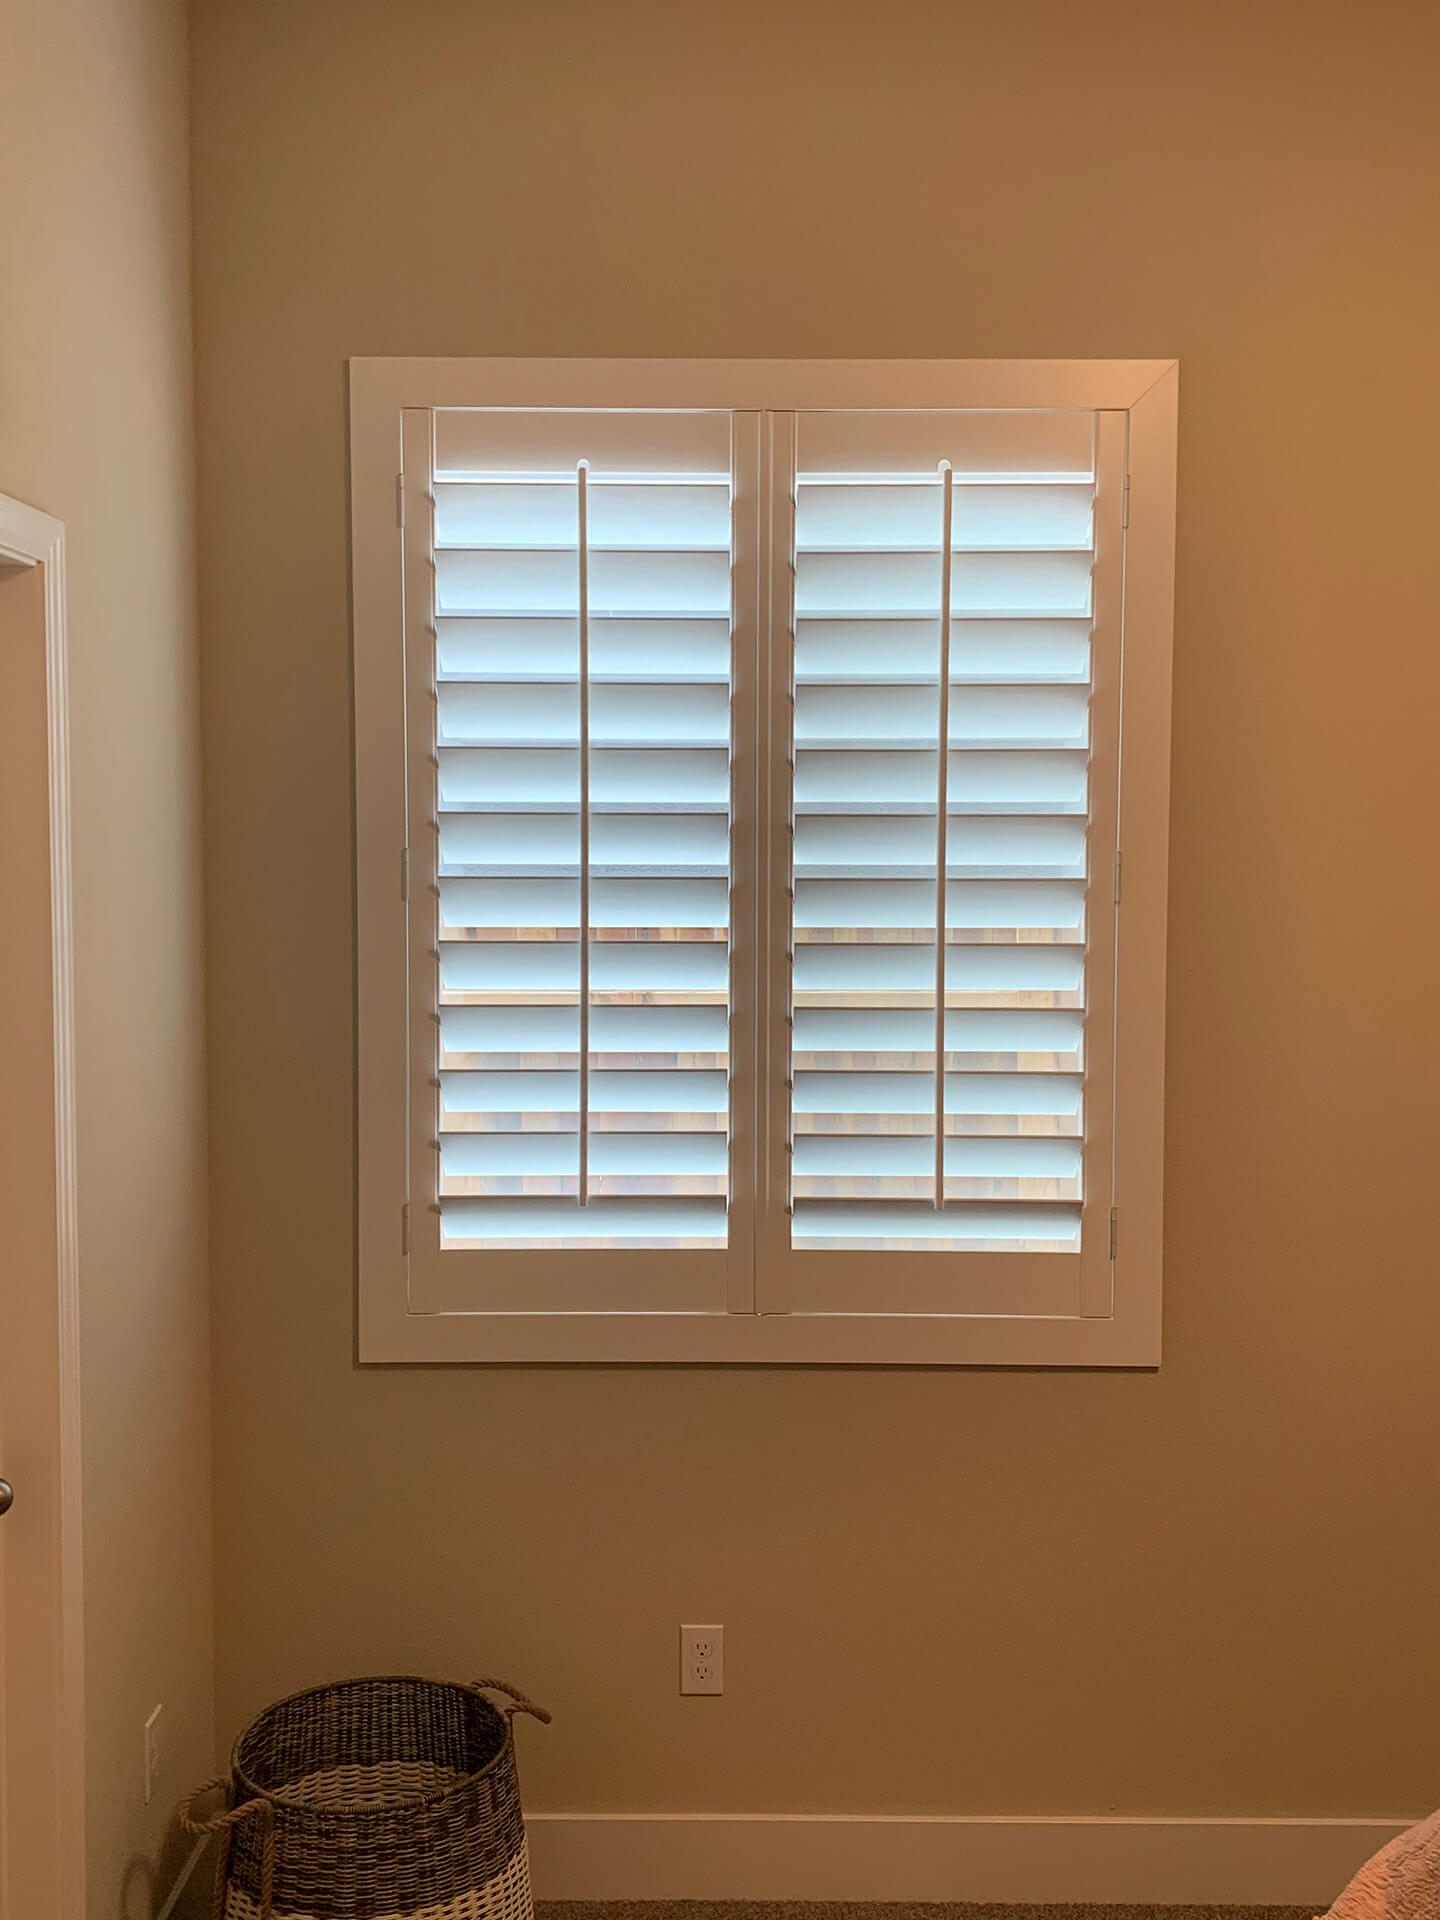 A single window covered with basic shutters